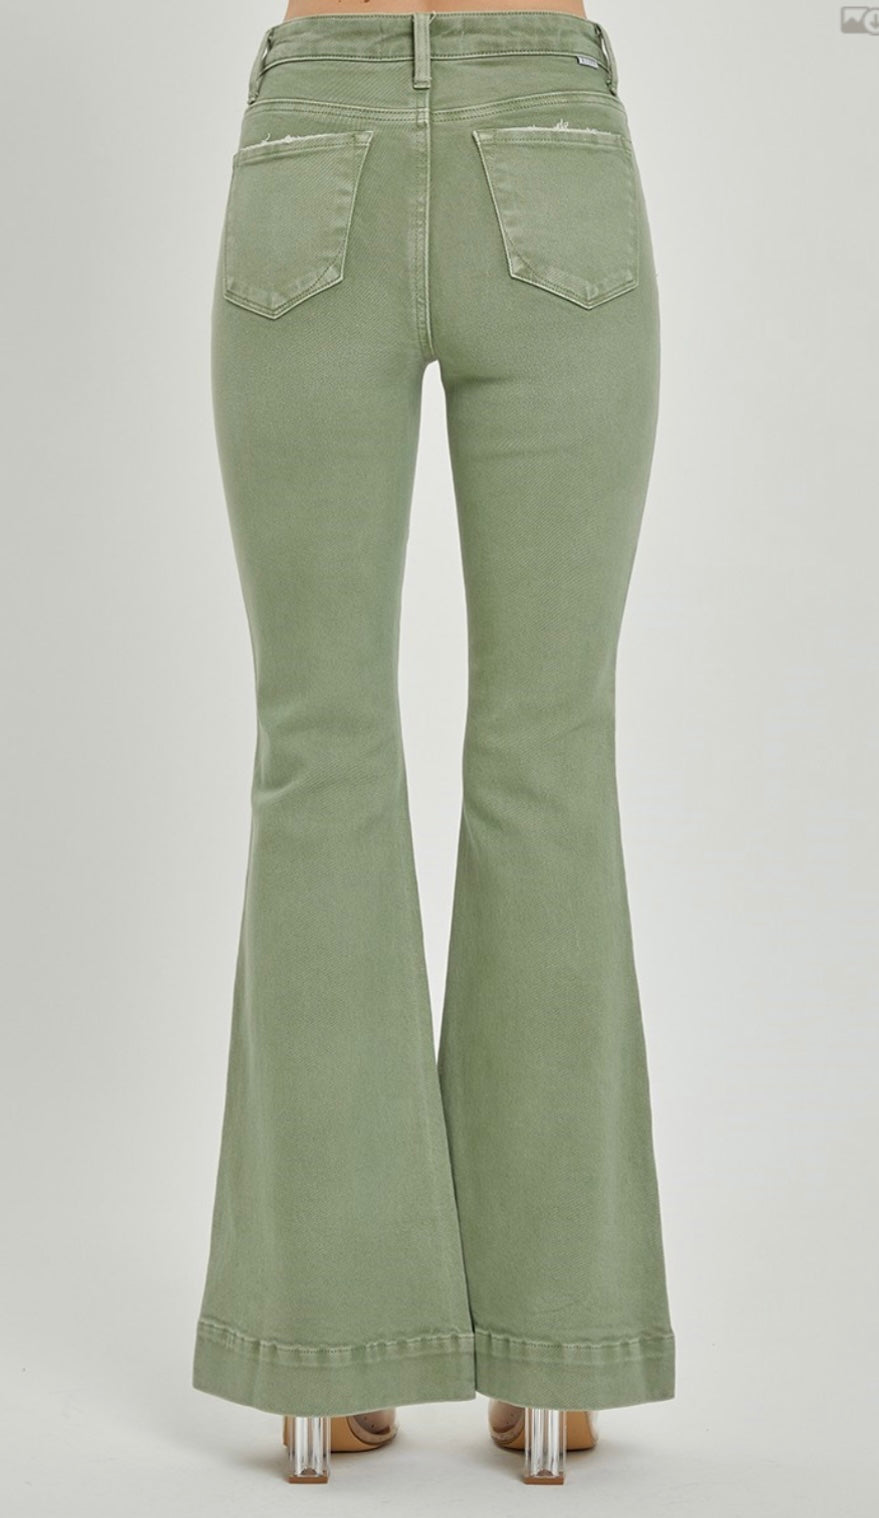 Olive High Rise Front Patch Pocket Jeans w/ Bell Bottom Leg